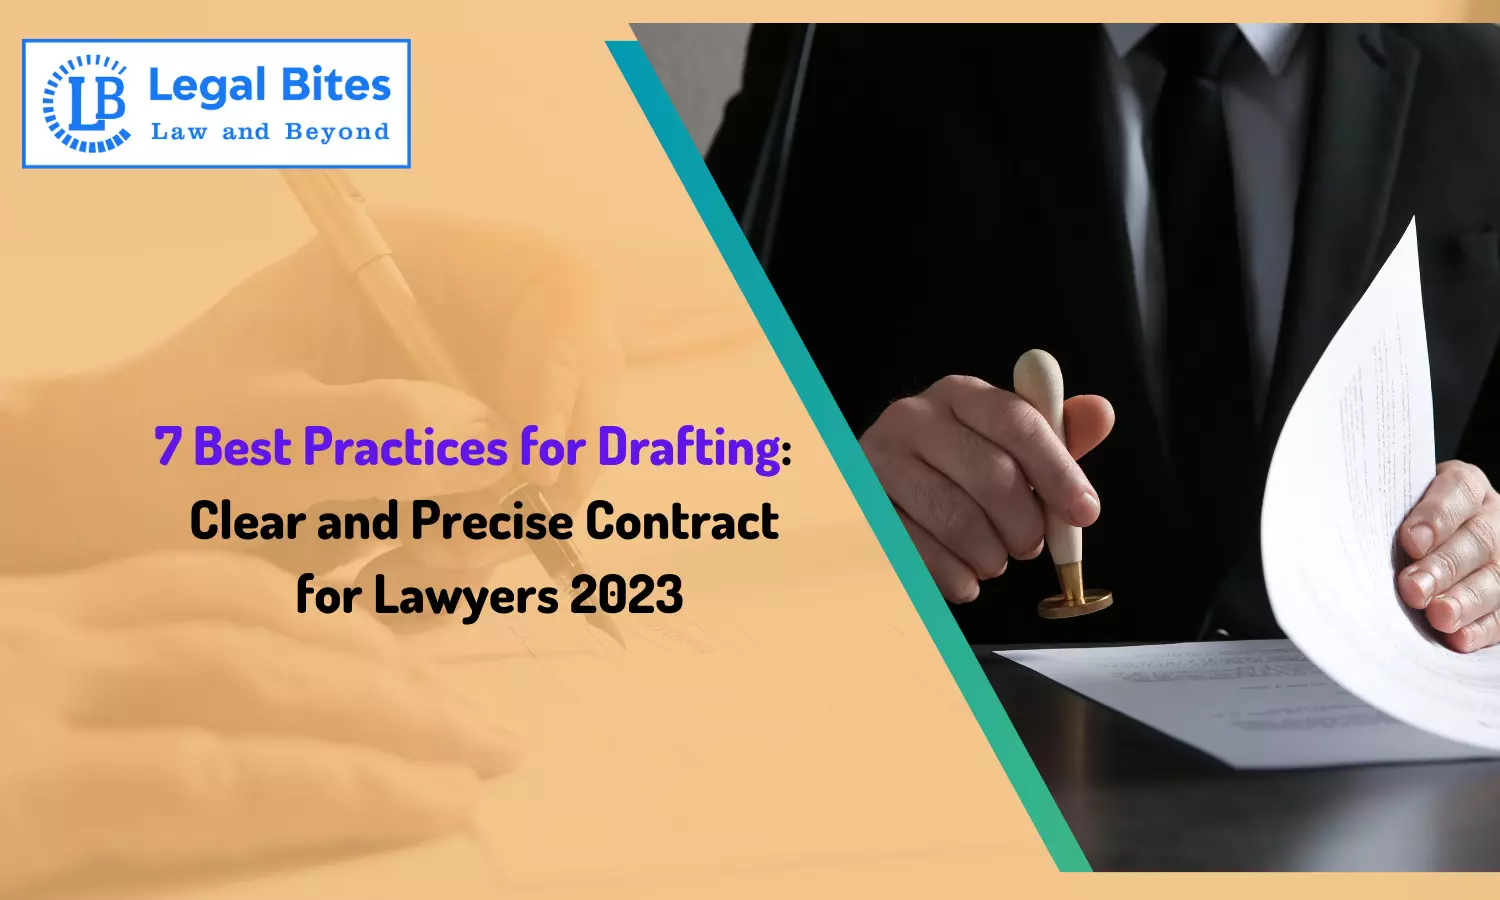 7 Best Practices for Drafting a Clear and Precise Contract for Lawyers 2023